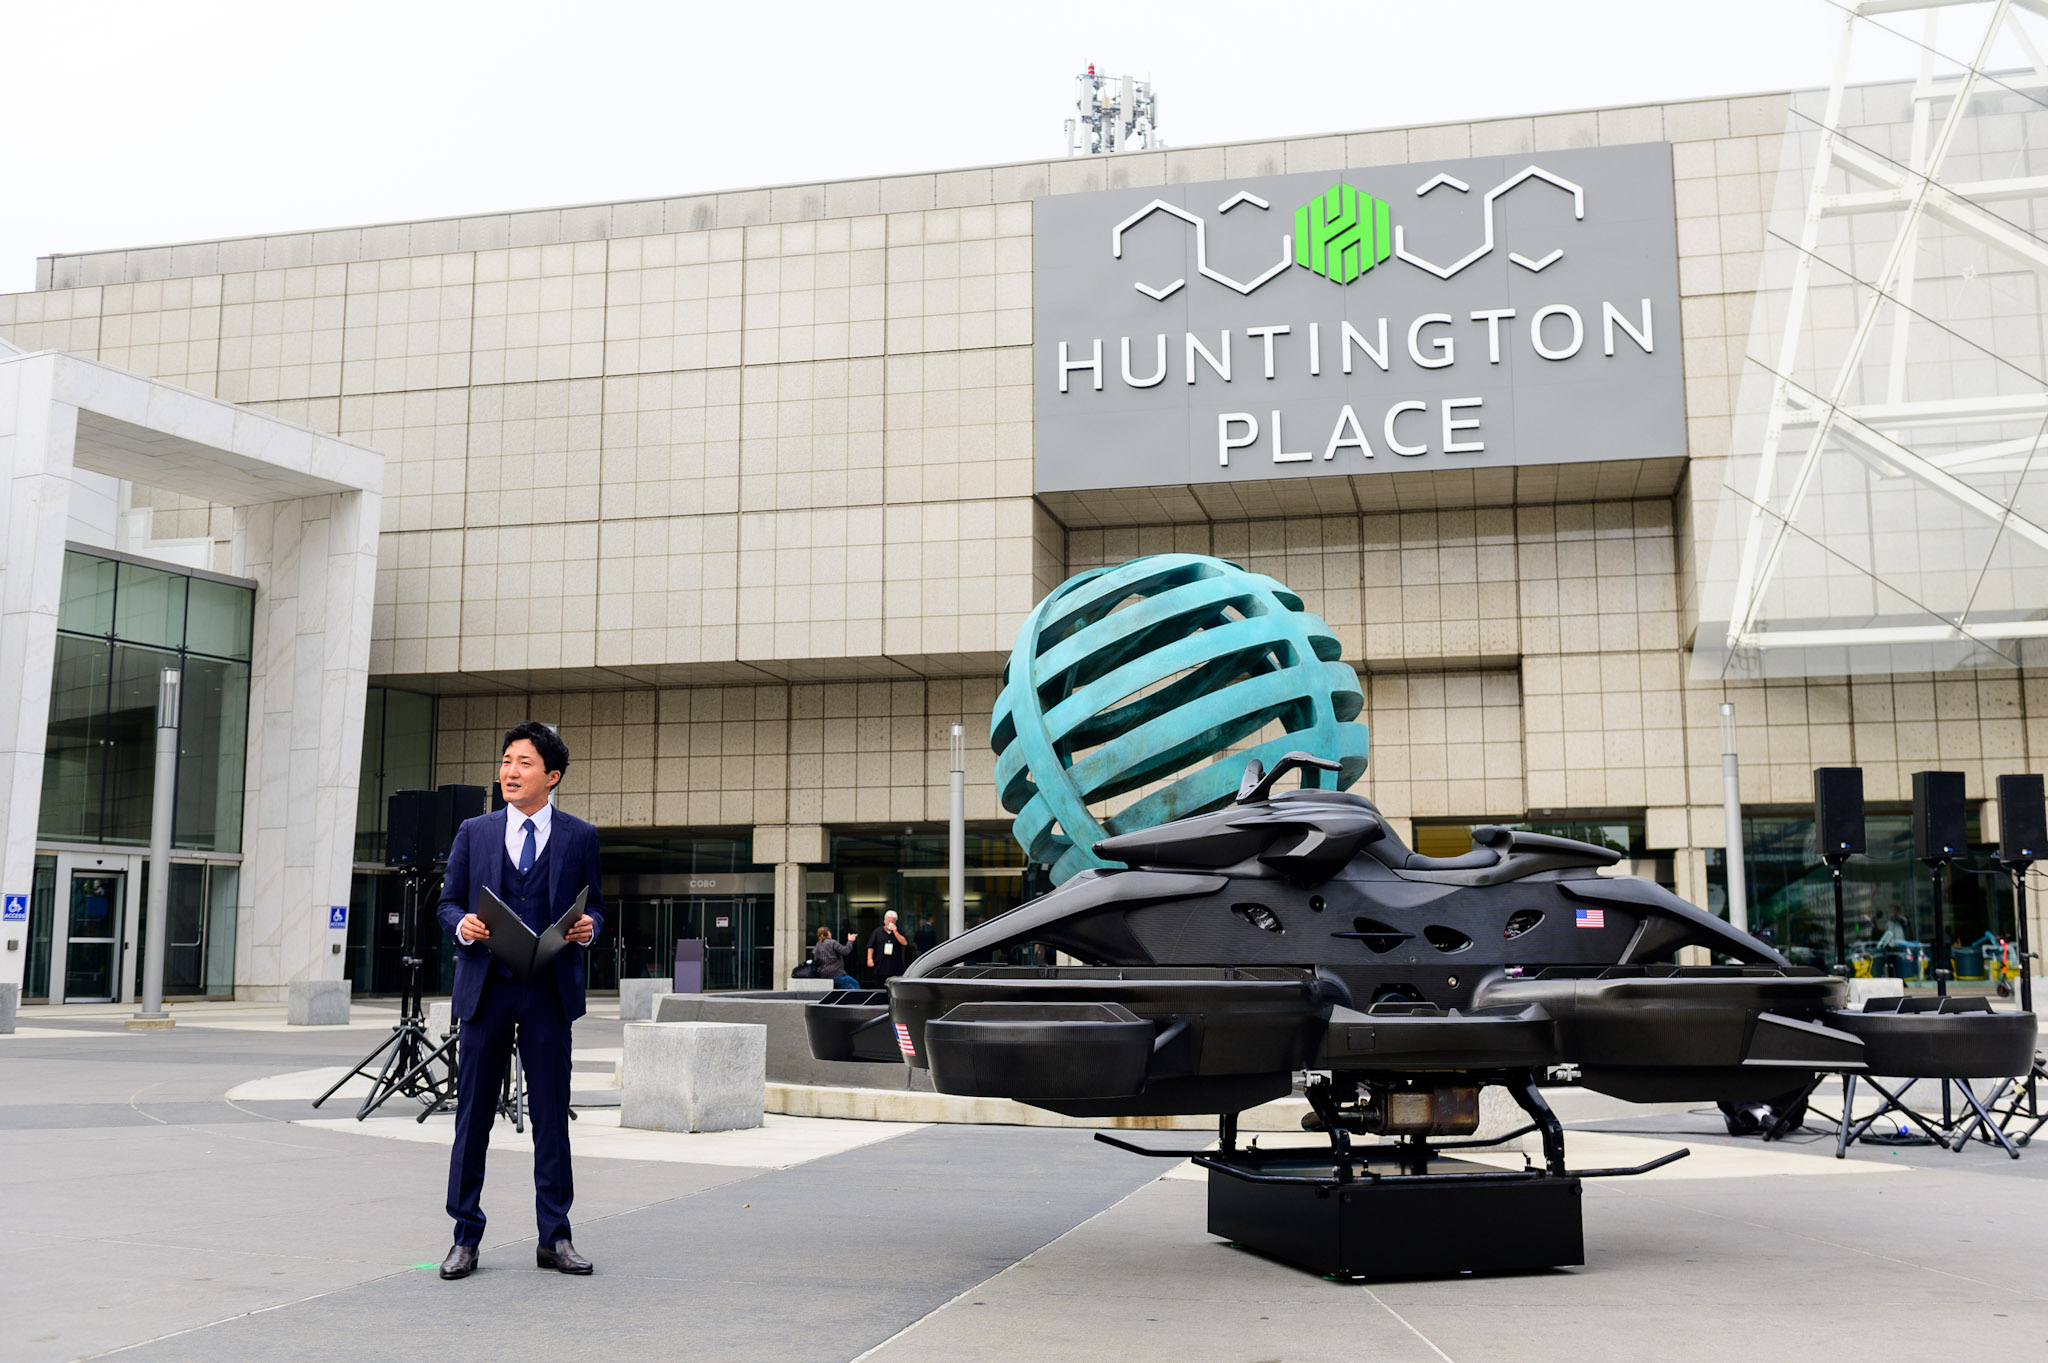 The XTURISMO flying bike is displayed outside as the 2022 North American International Auto Show begins with media preview day at Huntington Place in Detroit on Wednesday, Sept. 14 2022.